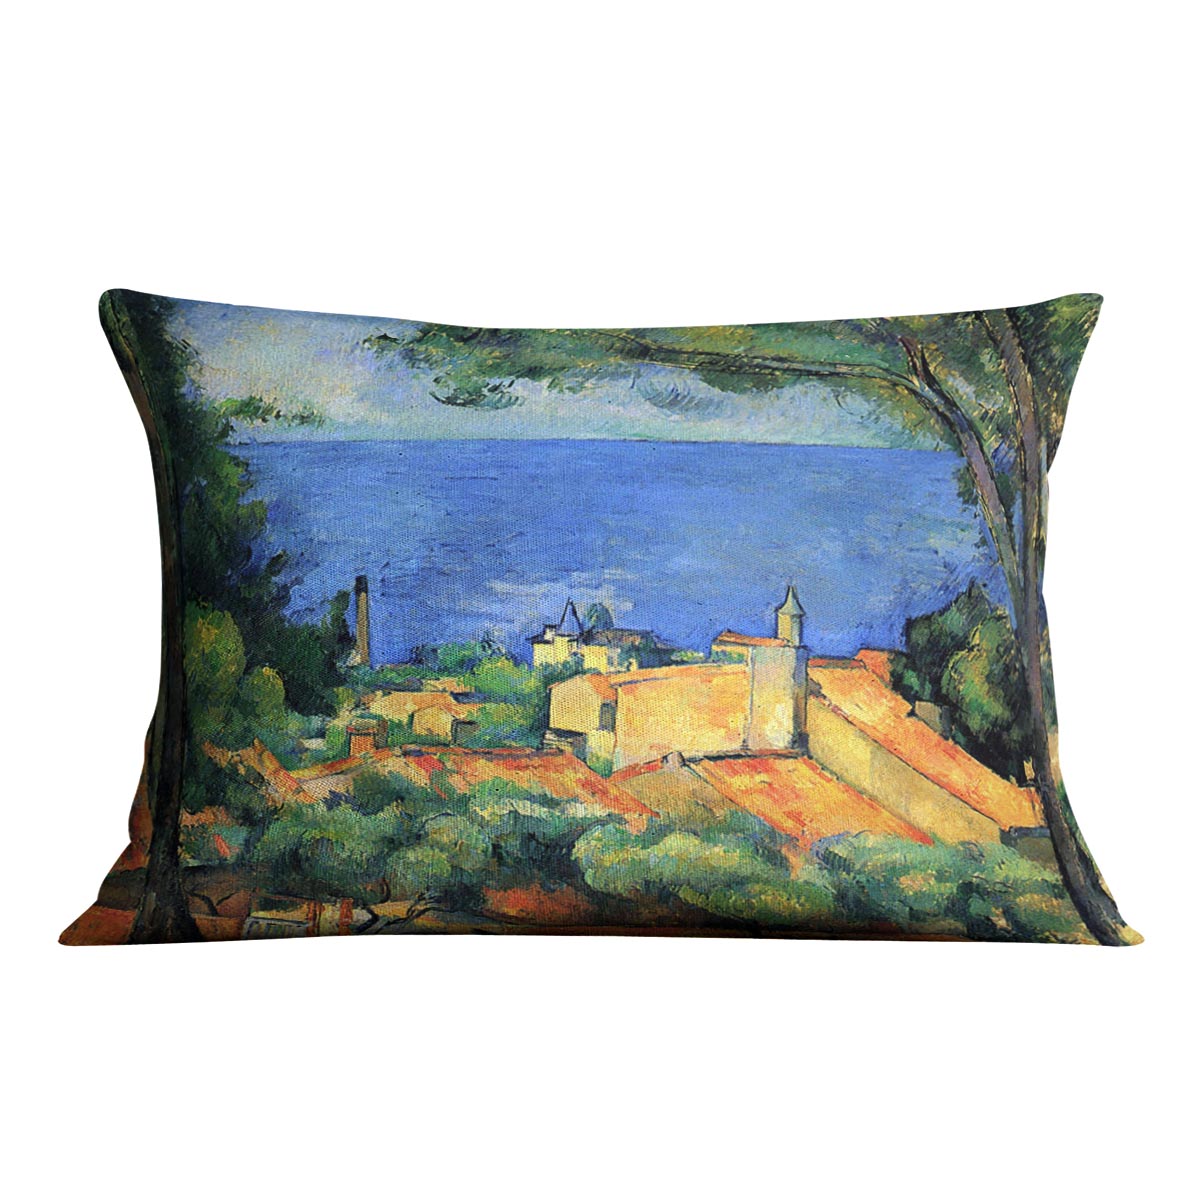 l'Estaque with Red Roofs by Cezanne Cushion - Canvas Art Rocks - 4